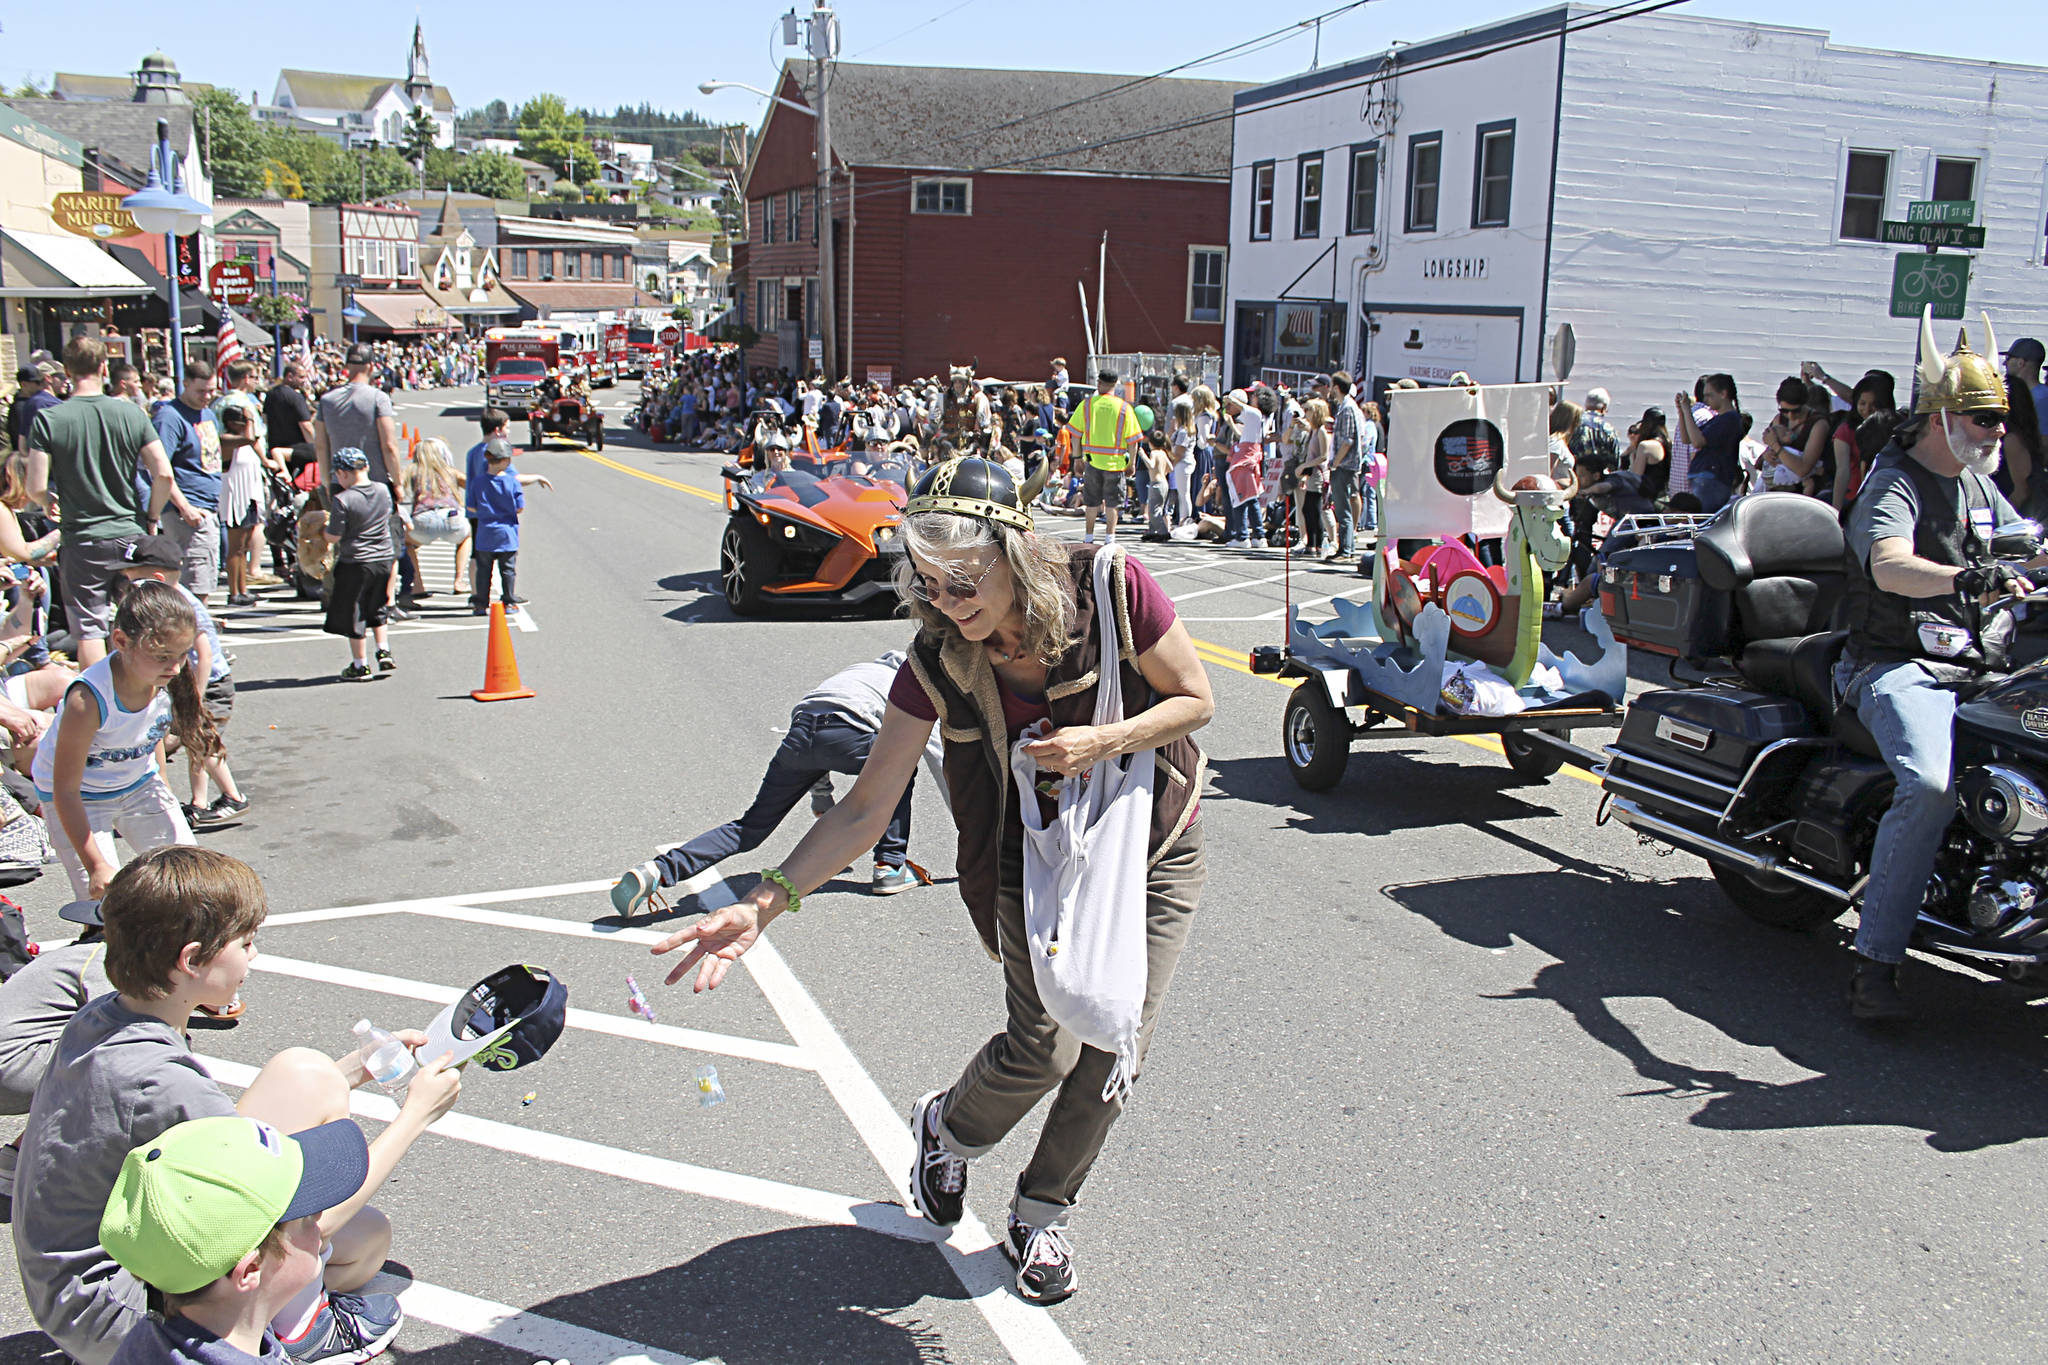 Volunteers toss candy to the crowd along the parade route during the 2017 Viking Fest Parade. Kitsap News Group